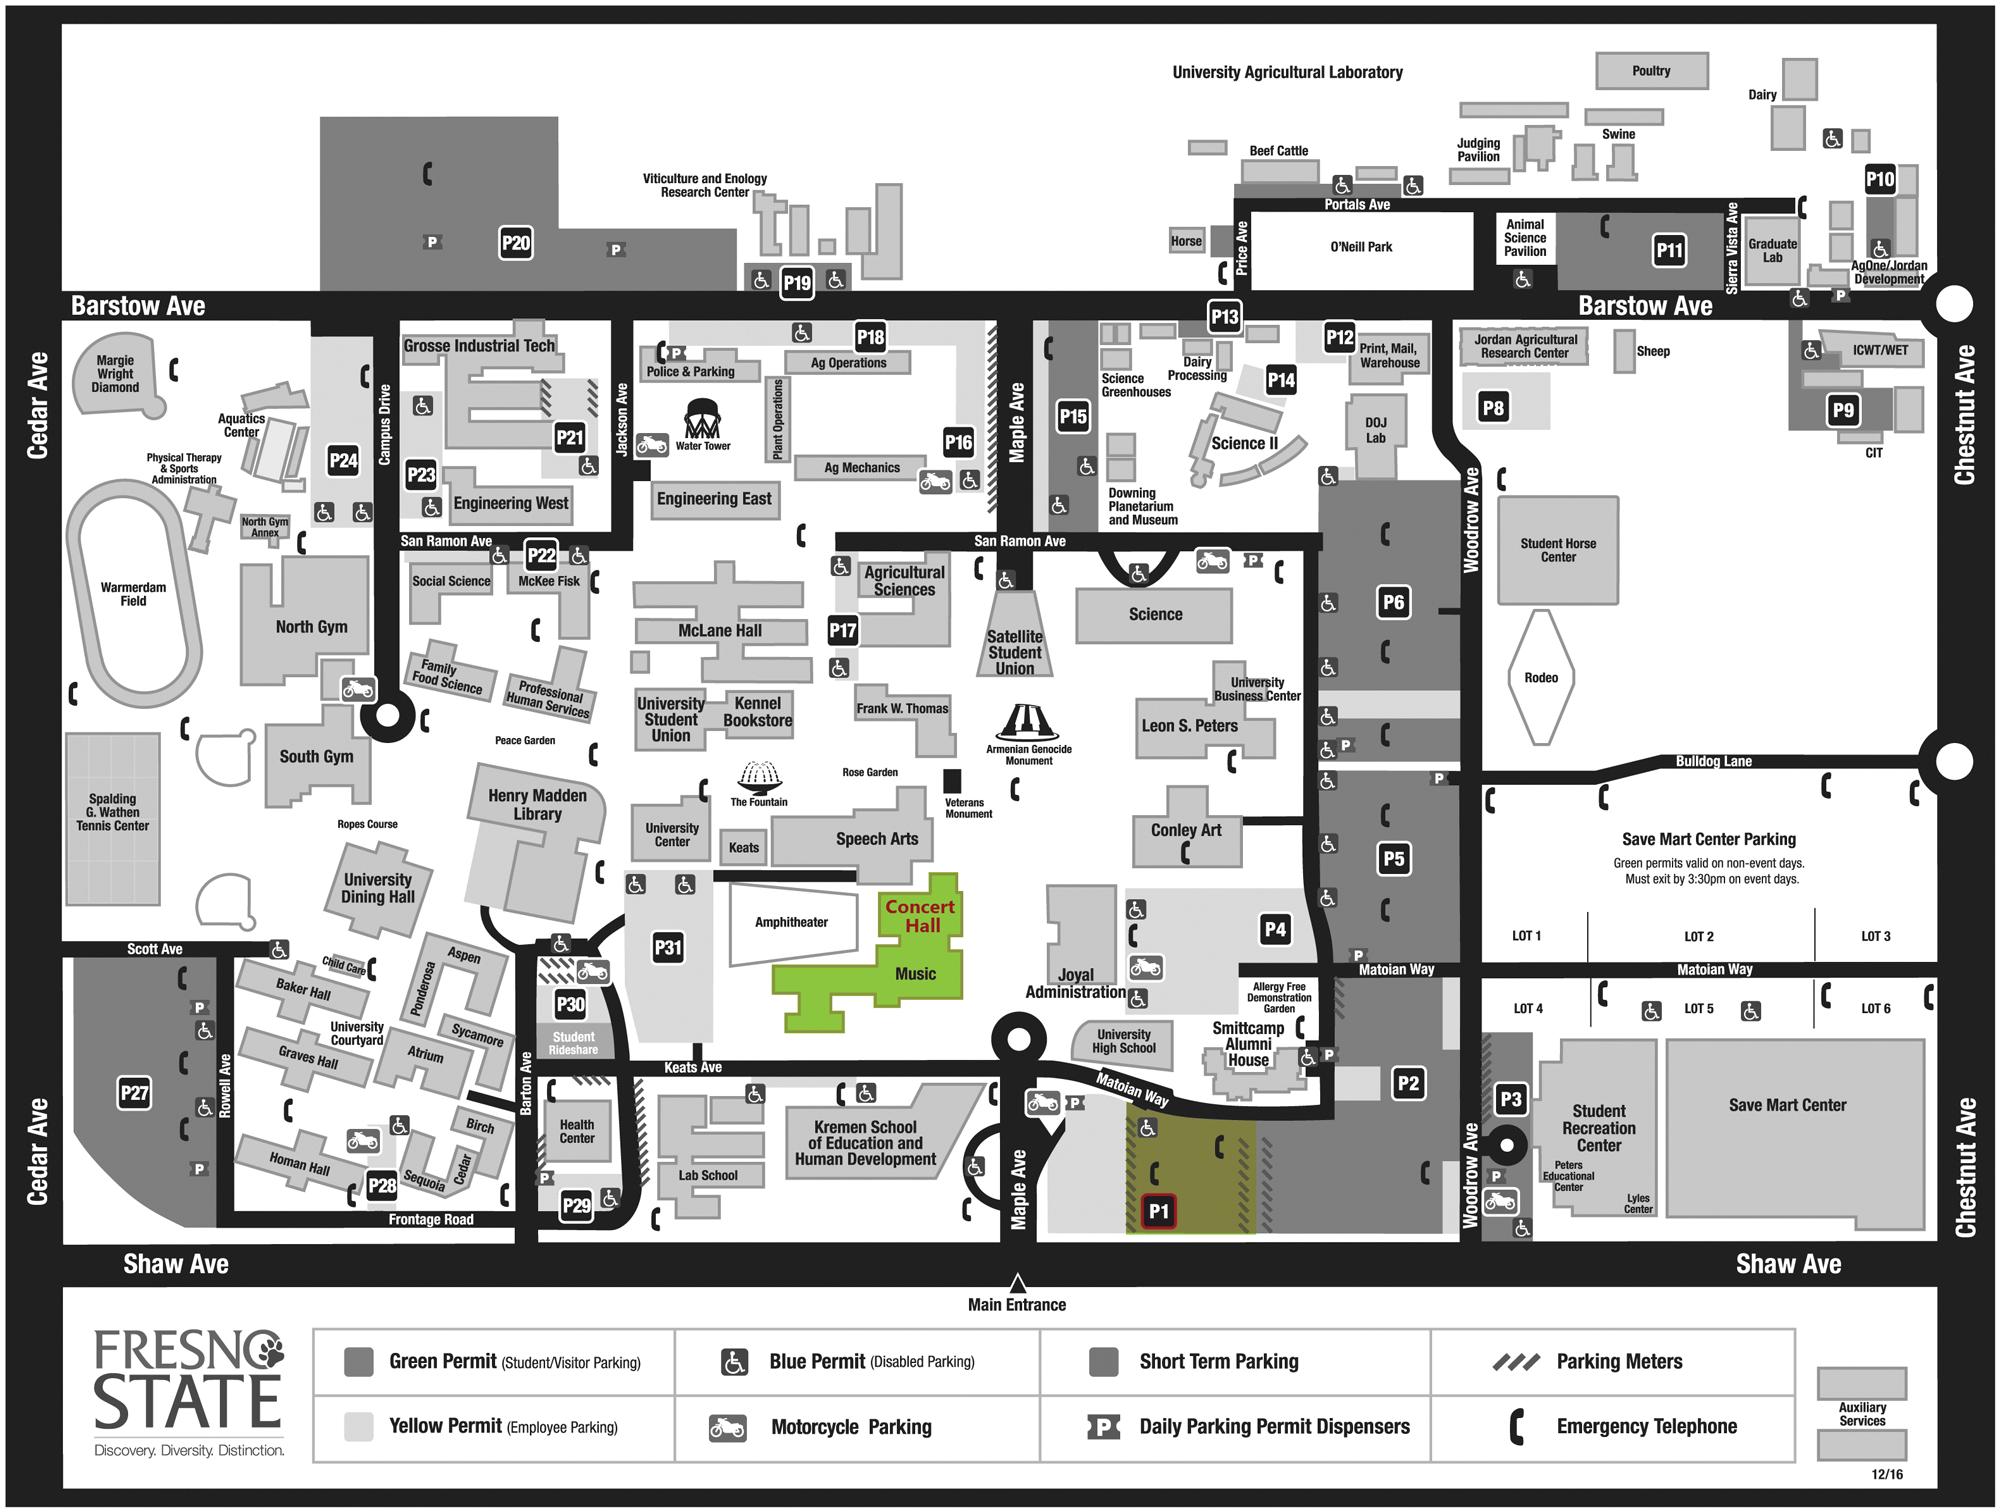 Pictured: Map of CSU Fresno